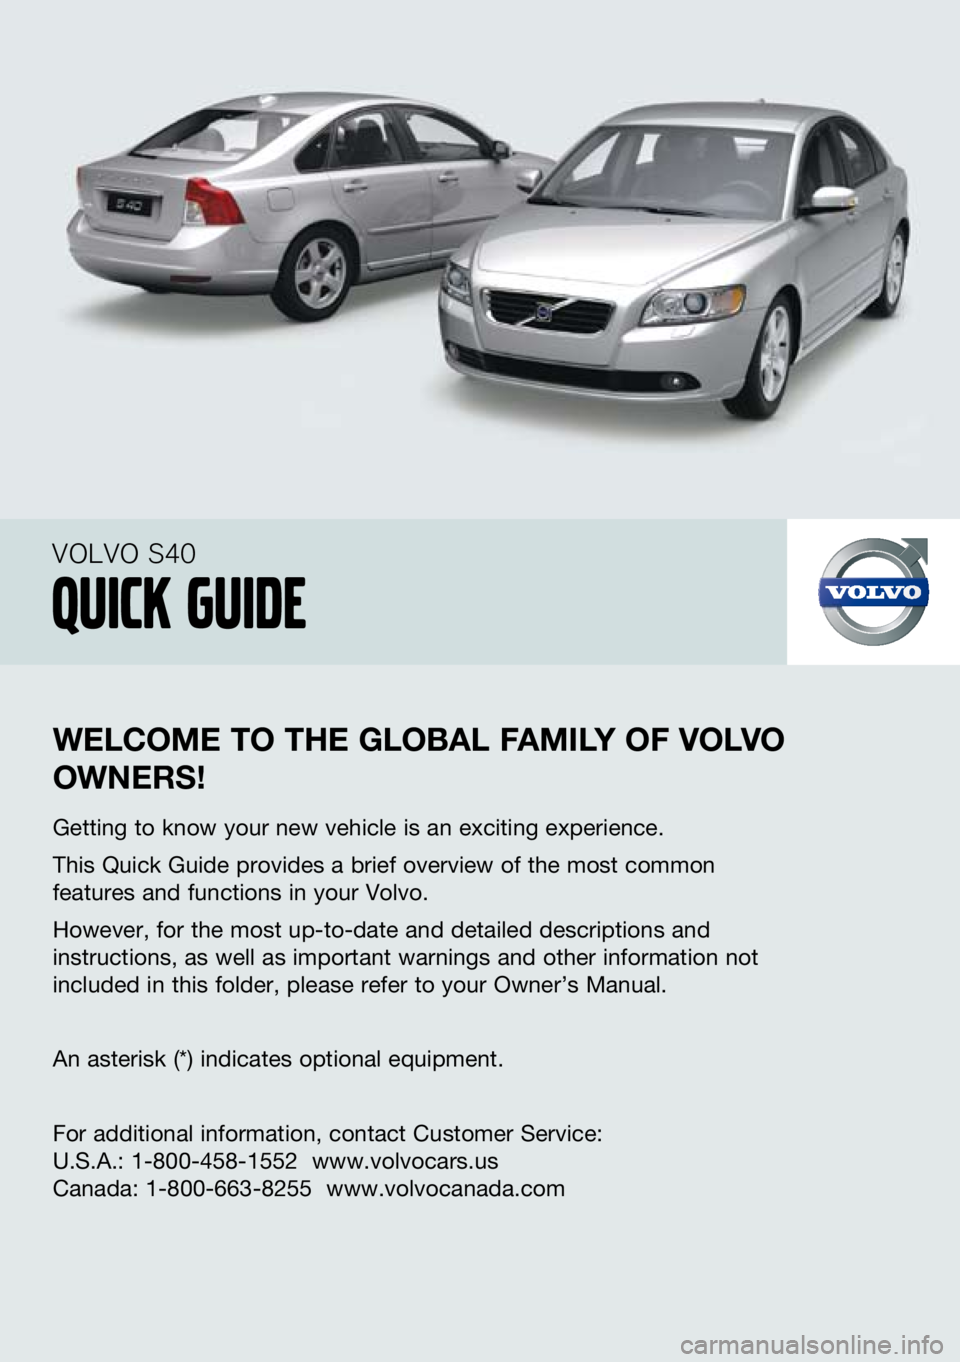 VOLVO S40 2010  Quick Guide 
    --
welcome to the  global F amIly  oF  volvo 
owner S!
Getting to know your new vehicle is an exciting experience.
This Quick Guide provides a brief overview of the most common 
features and func